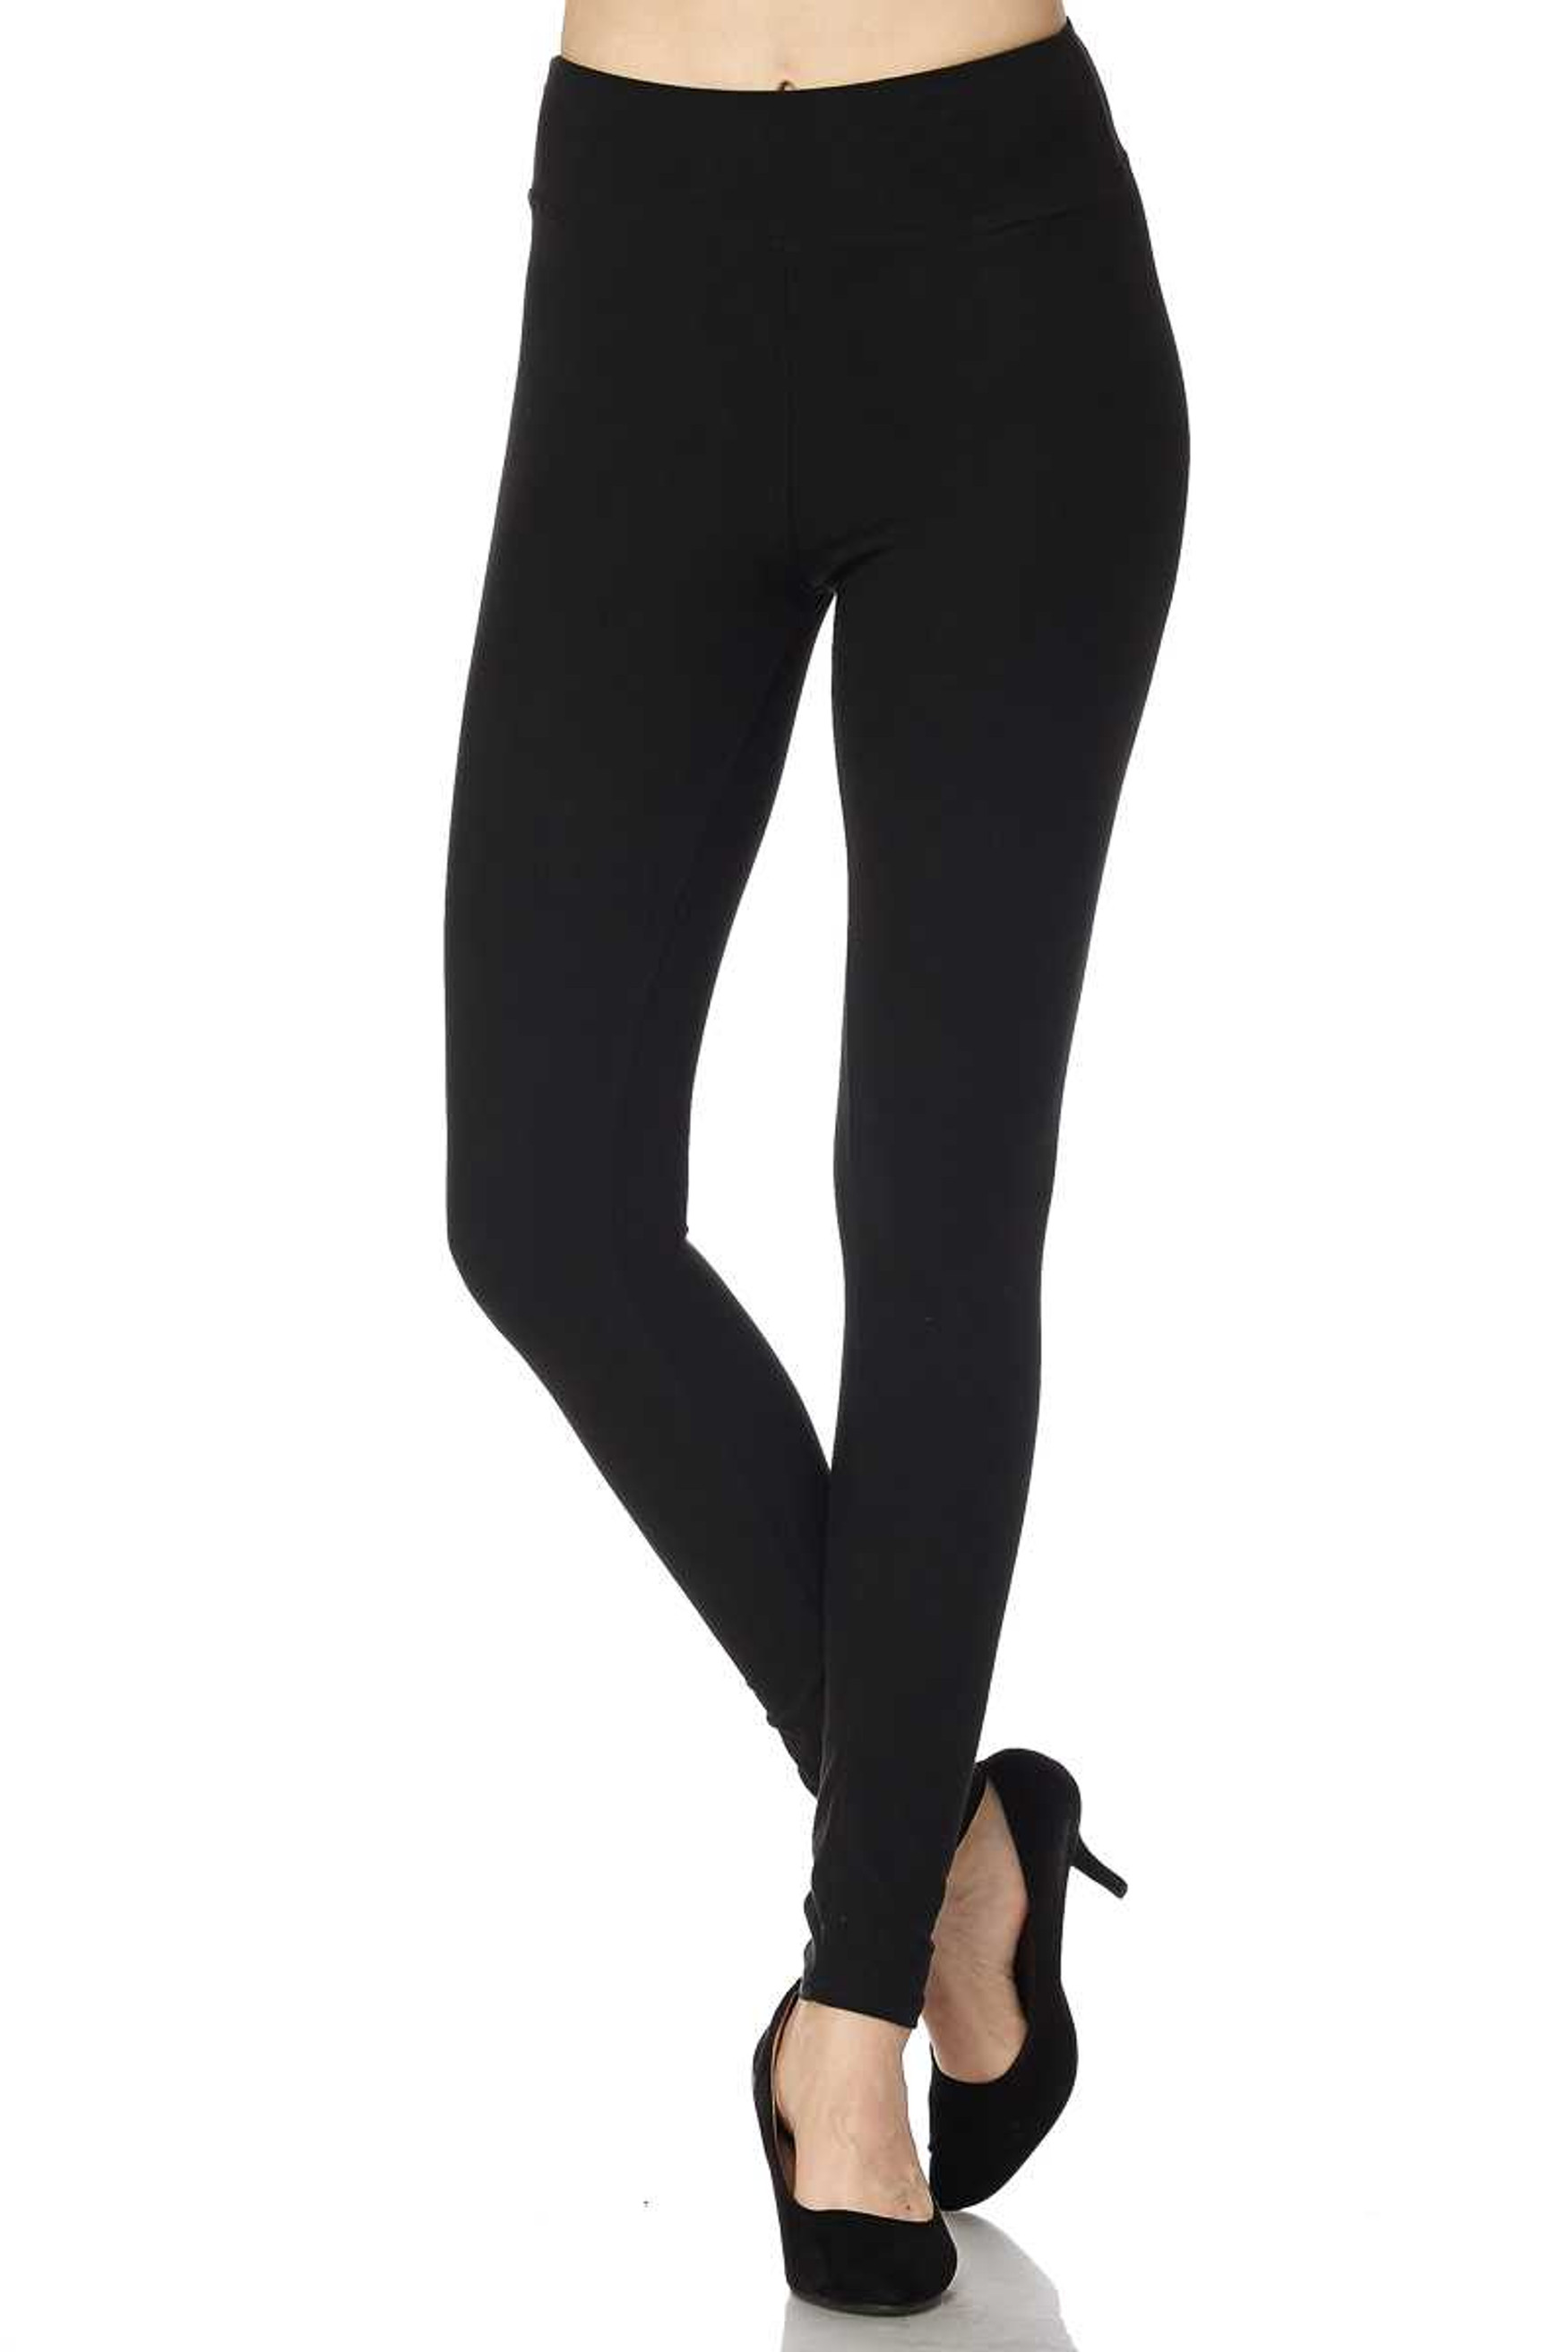 Brushed High Waisted Basic Solid Leggings - 3 Inch Waist